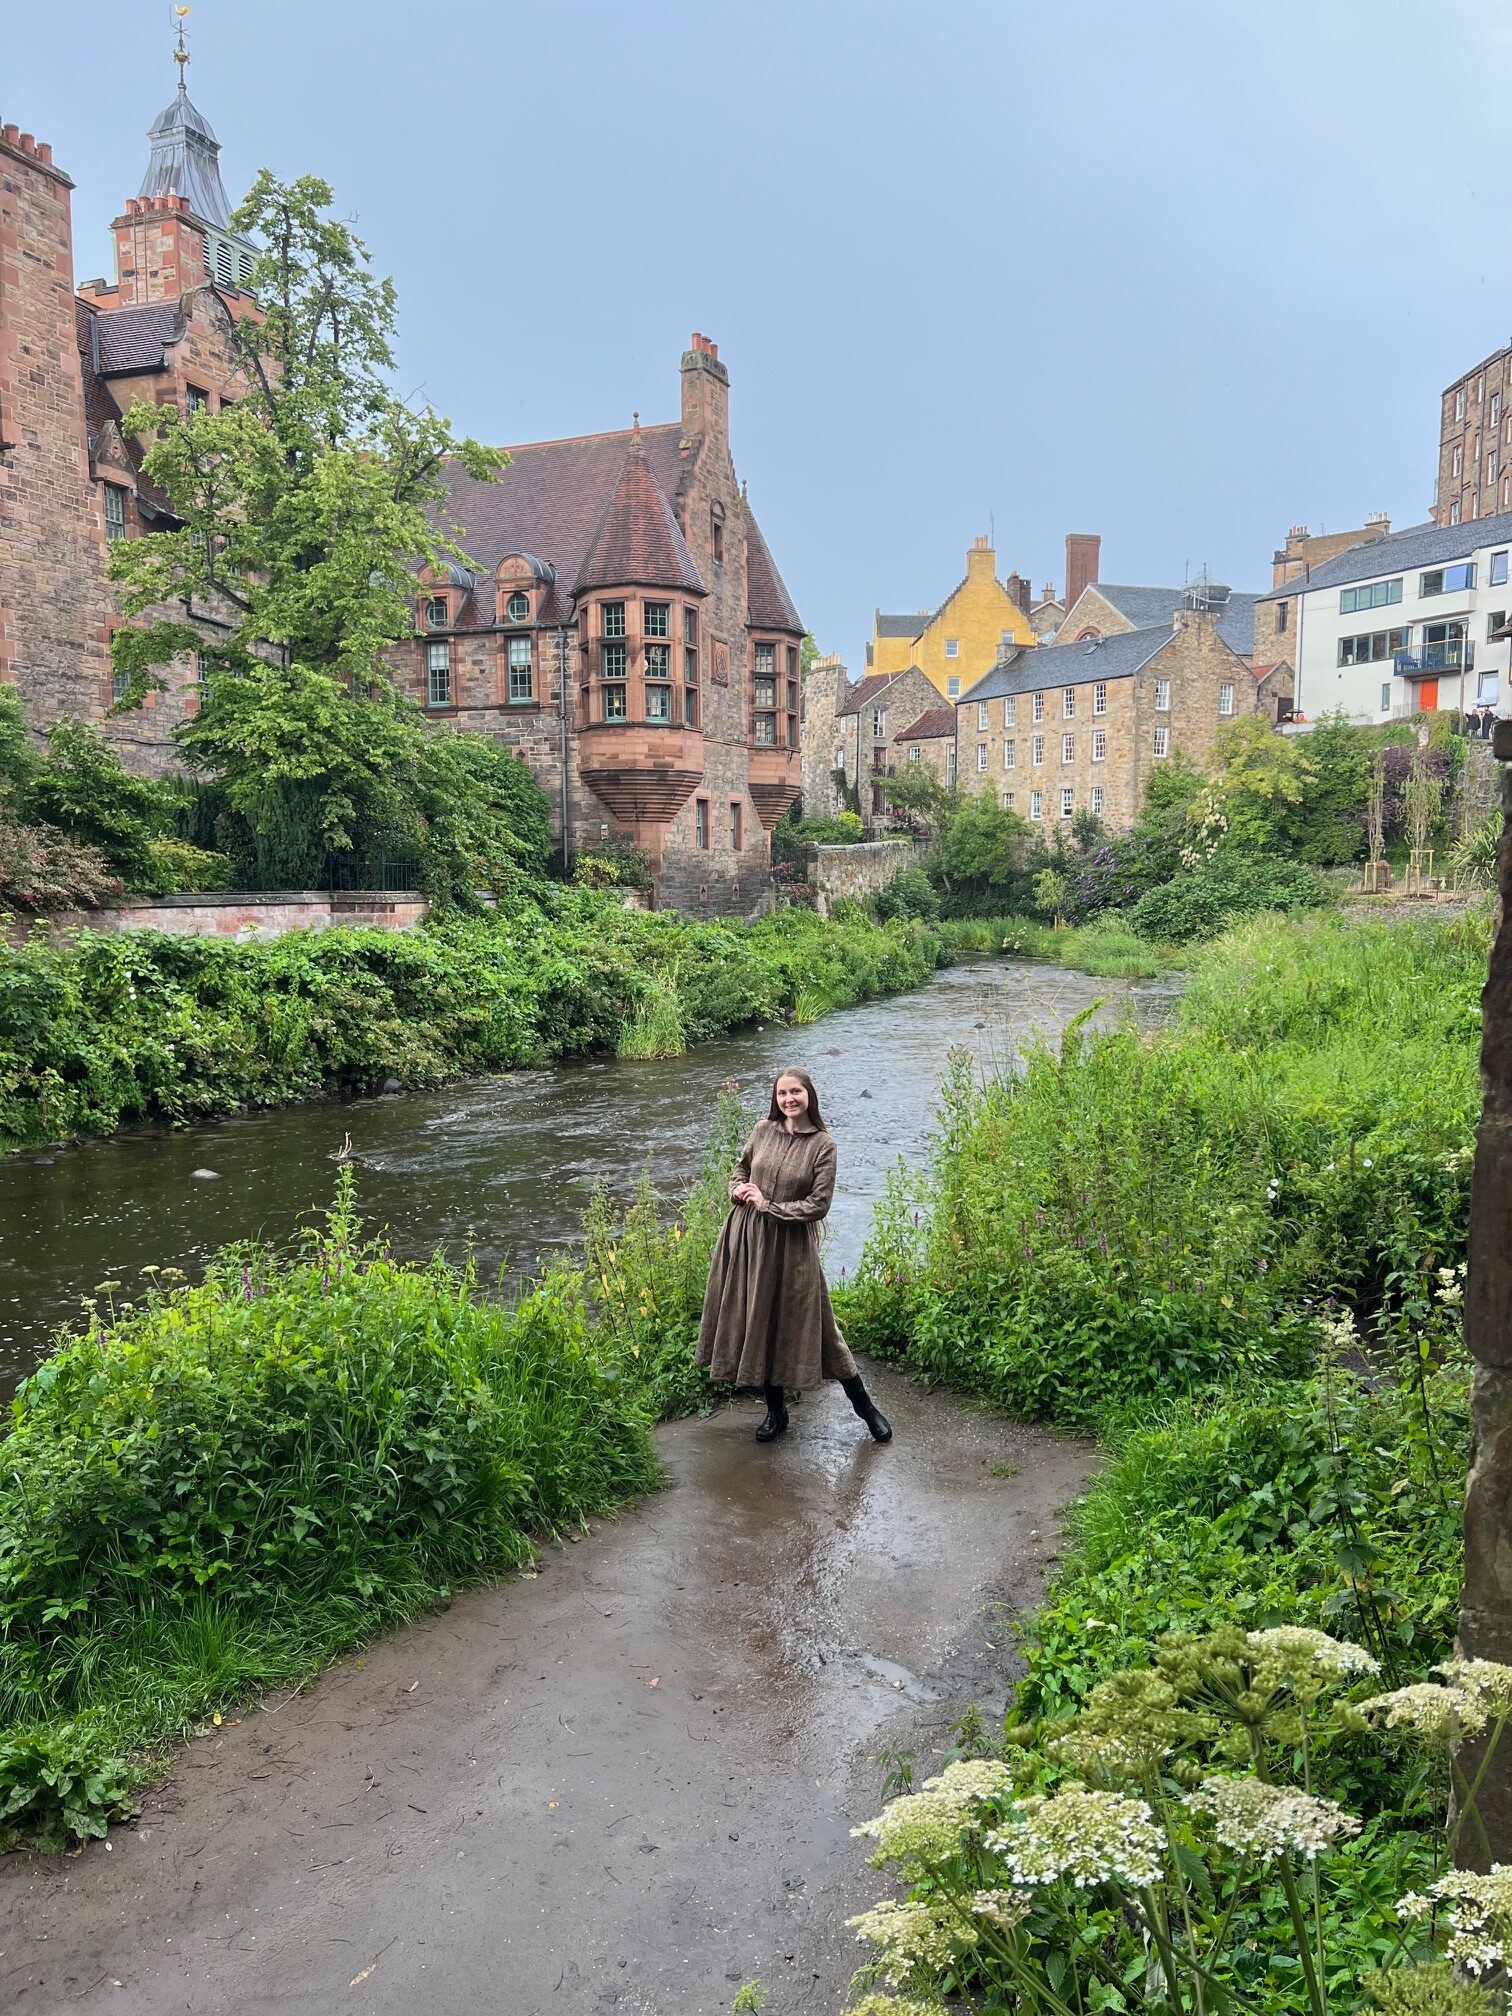 A girl in a Brown dress standing in front of the River with the Castle in the background at Dean Village